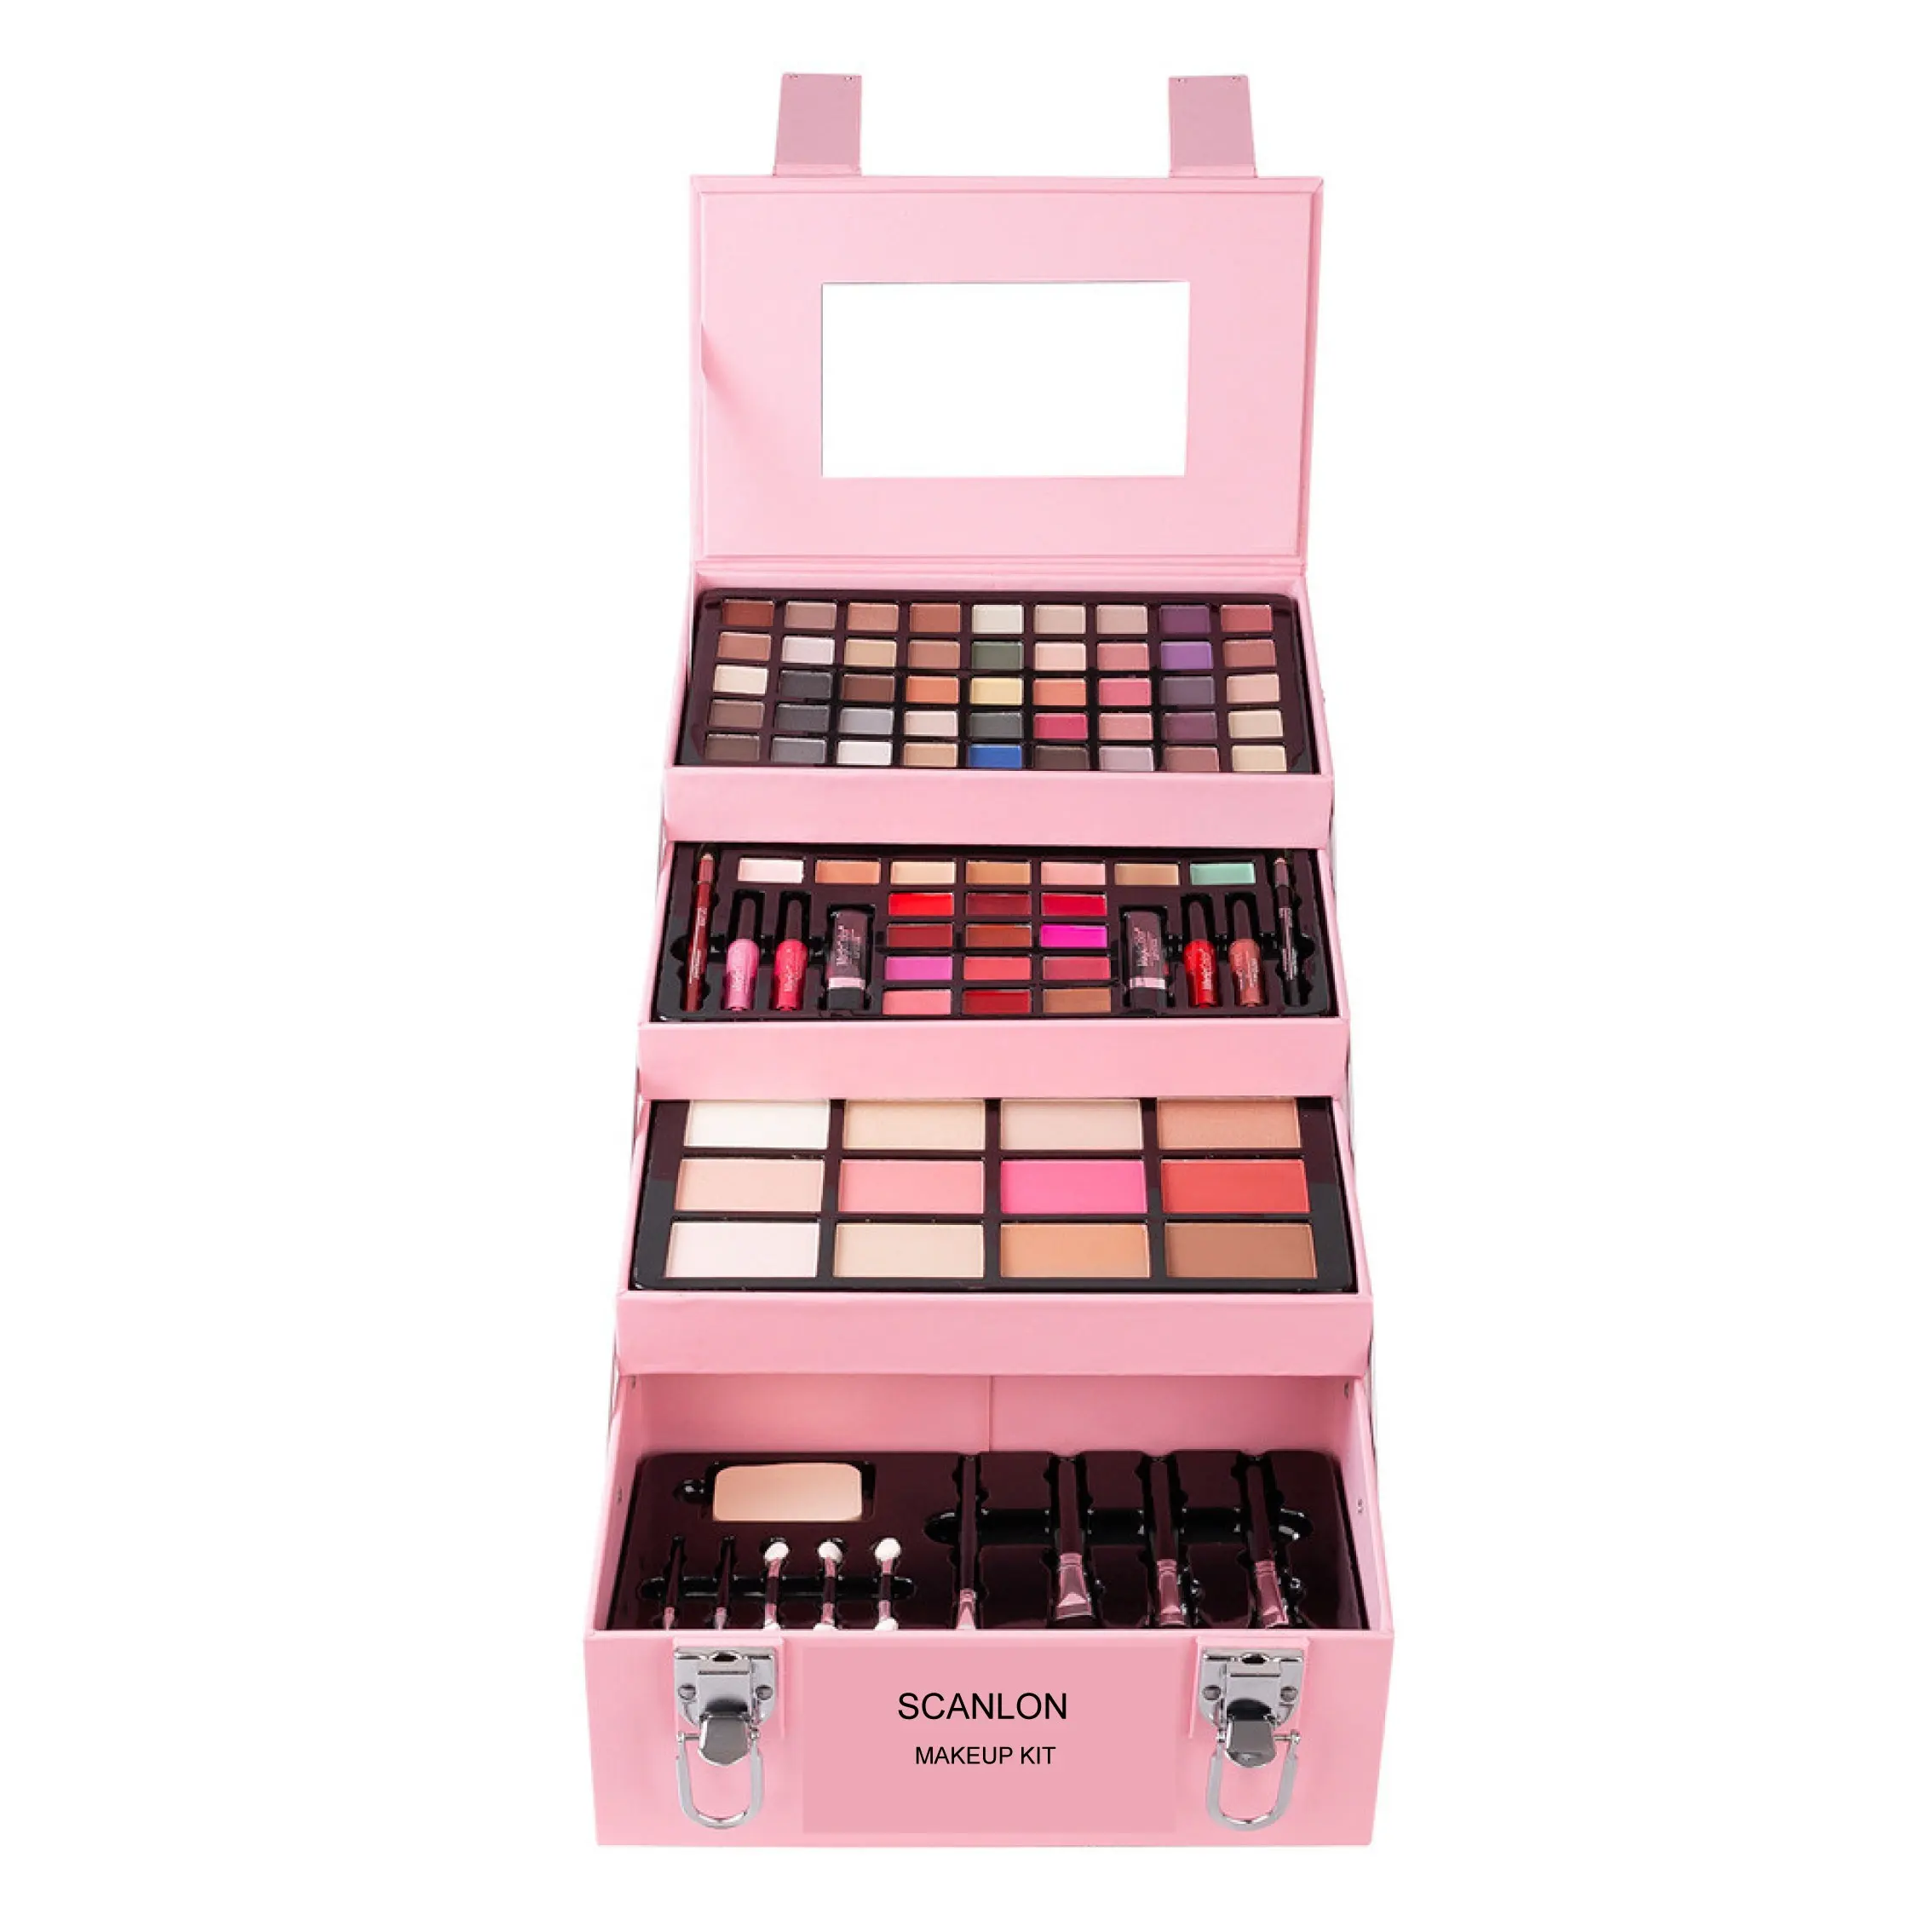 Fashional luxury makeup kit professional private label long-lasting makeup kit for girl